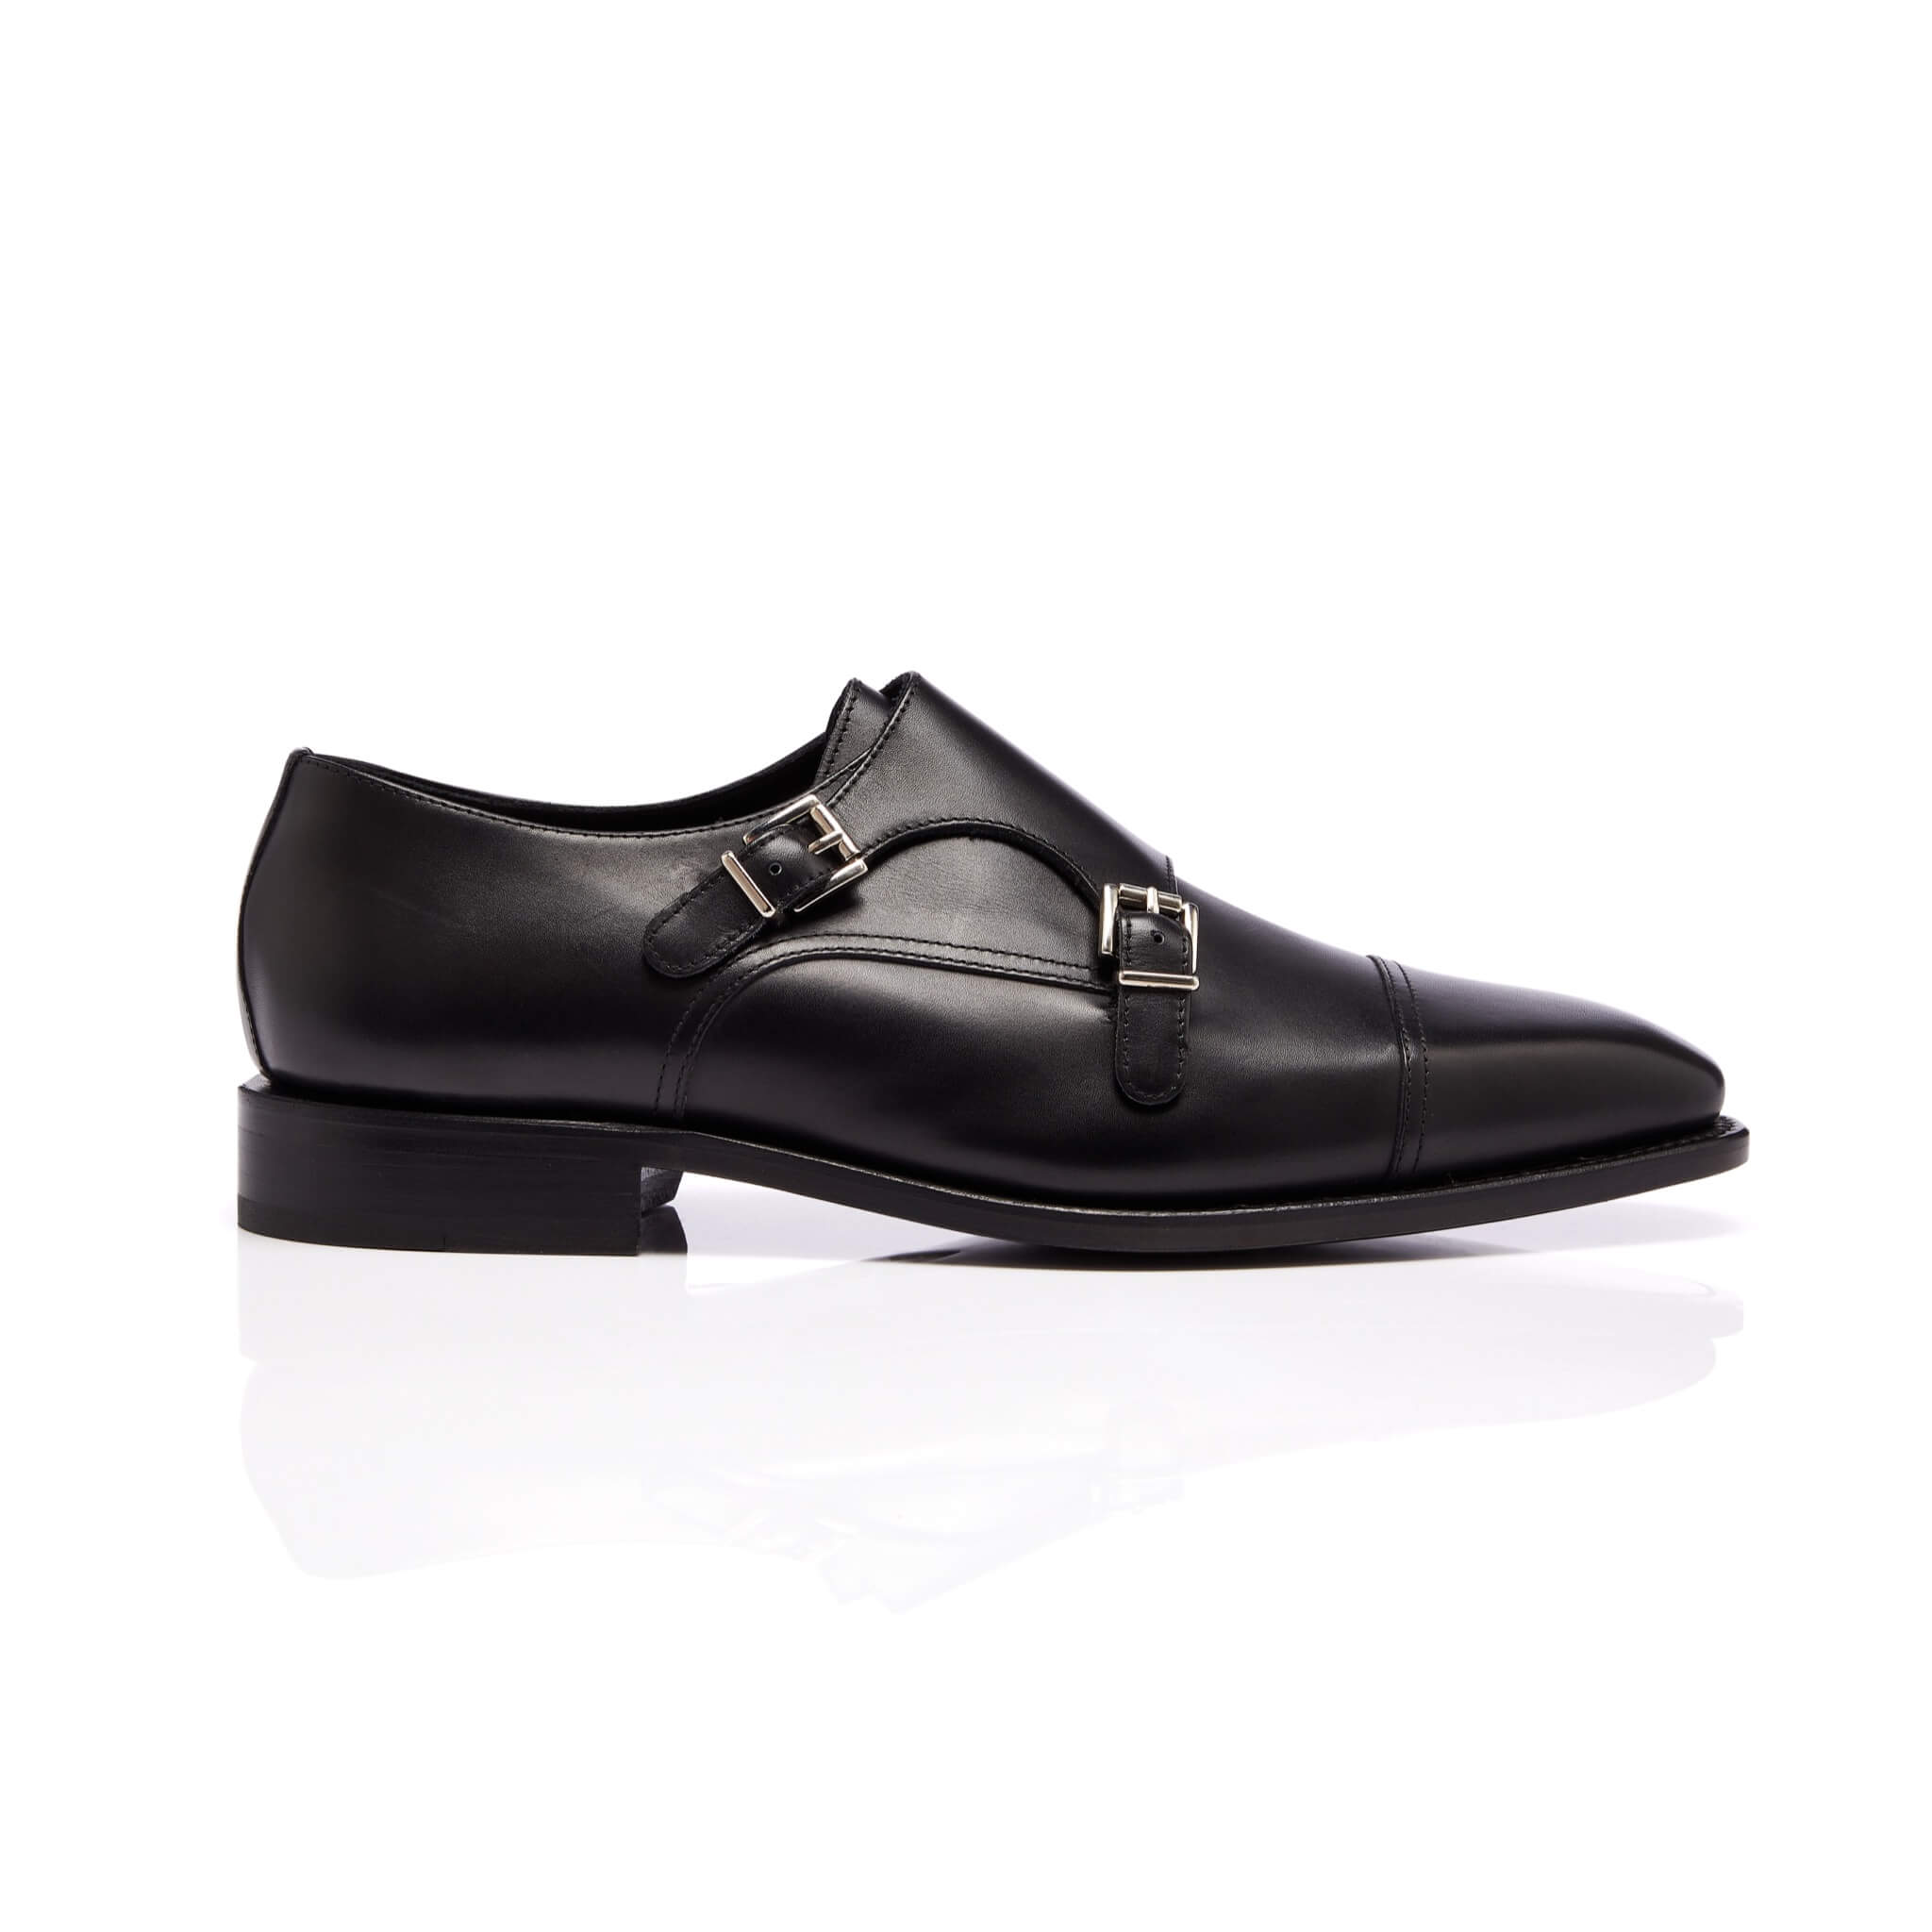 Monk Strap Shoes: Elevating Your Style